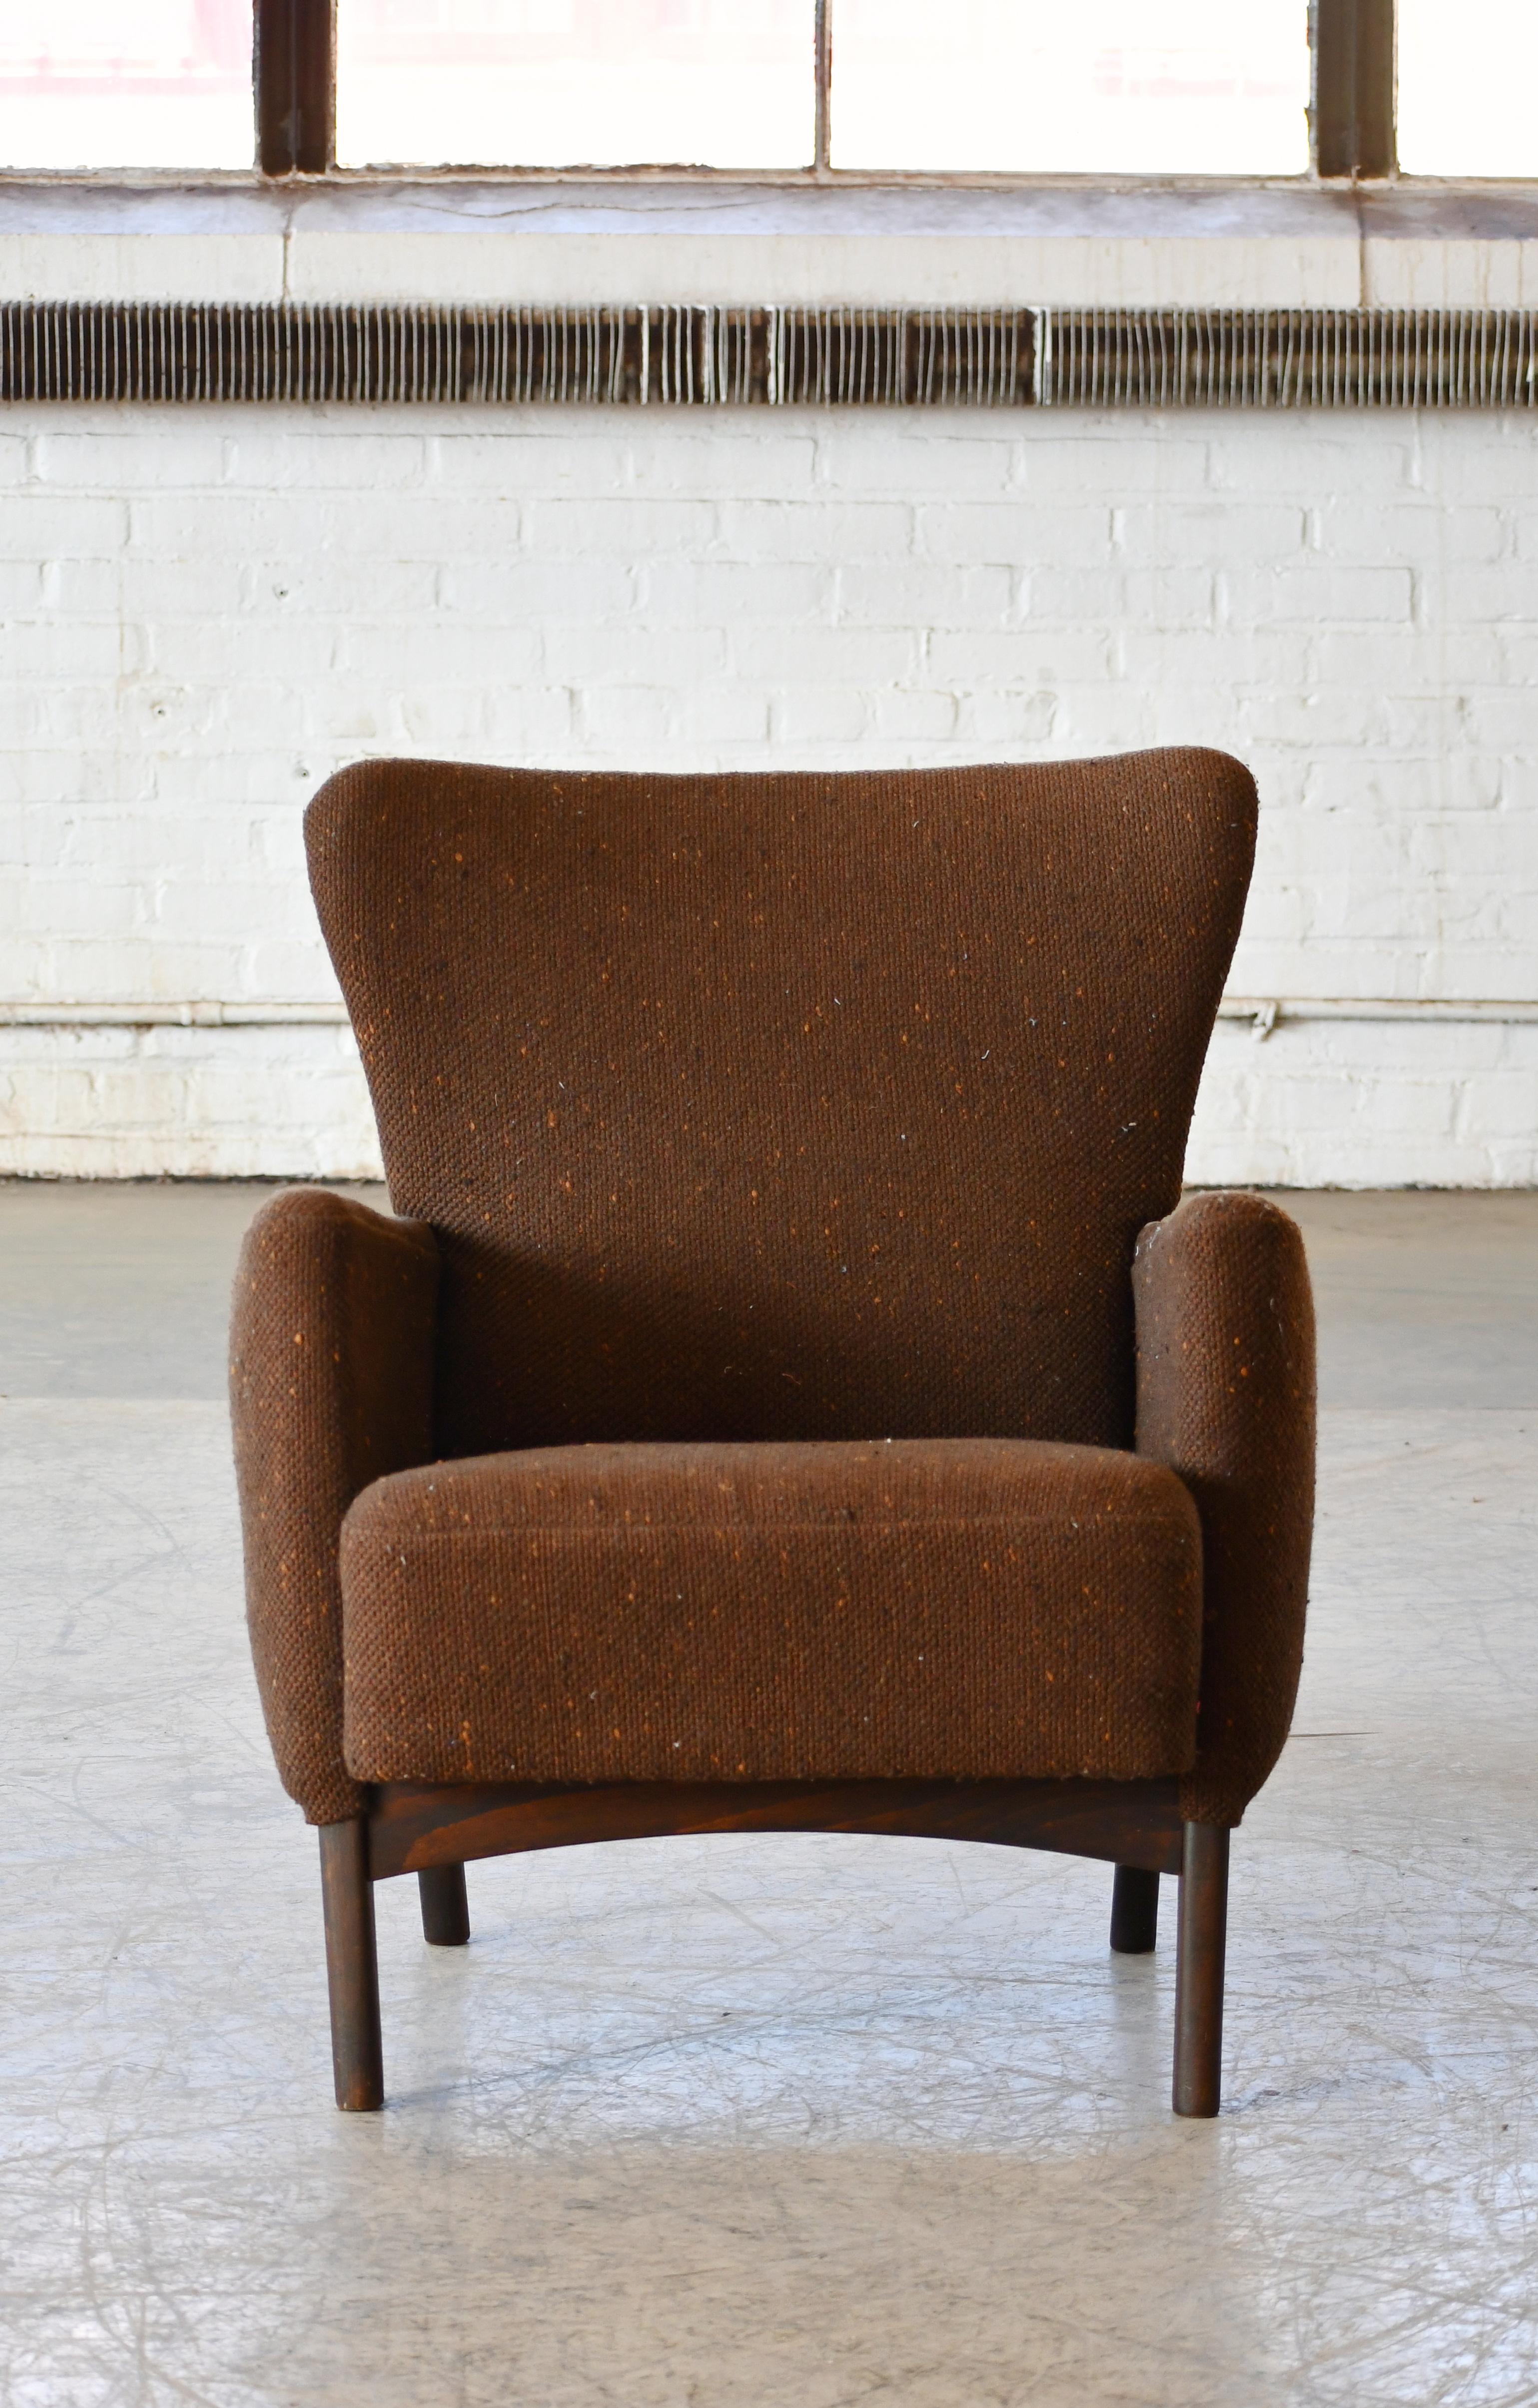 Beautiful 1950s Danish easy chair by Fritz Hansen. Very elegant with a sculptural organic shape and harmonious proportions and size making it very versatile and well suited for today's urban dwellings. Fabric is worn and need to be replaced. We are